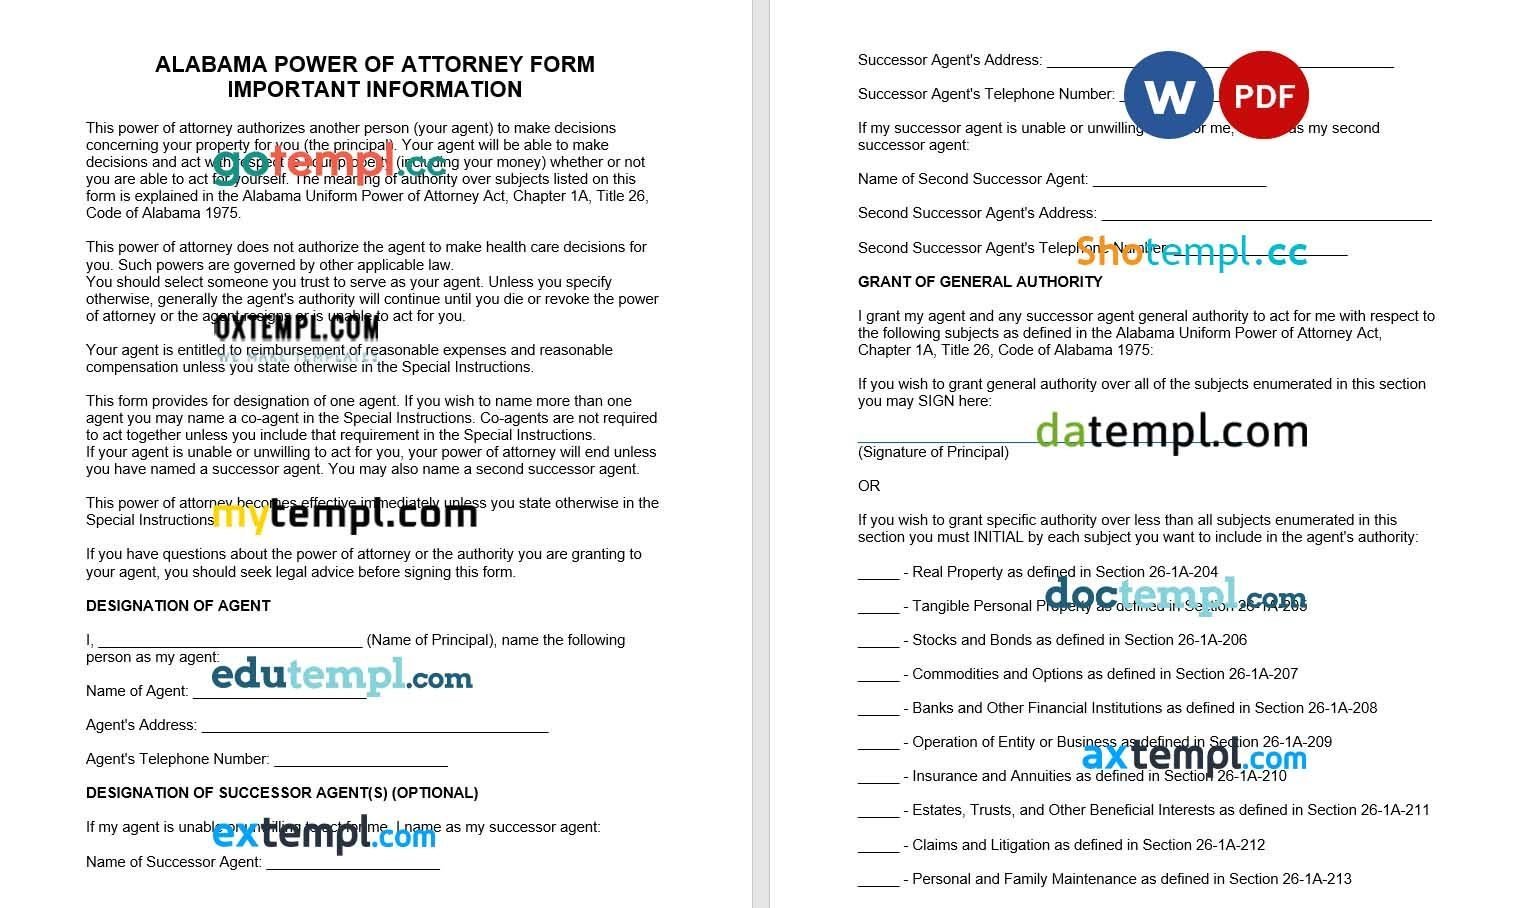 Iowa Real Estate Power of Attorney Form example, fully editable